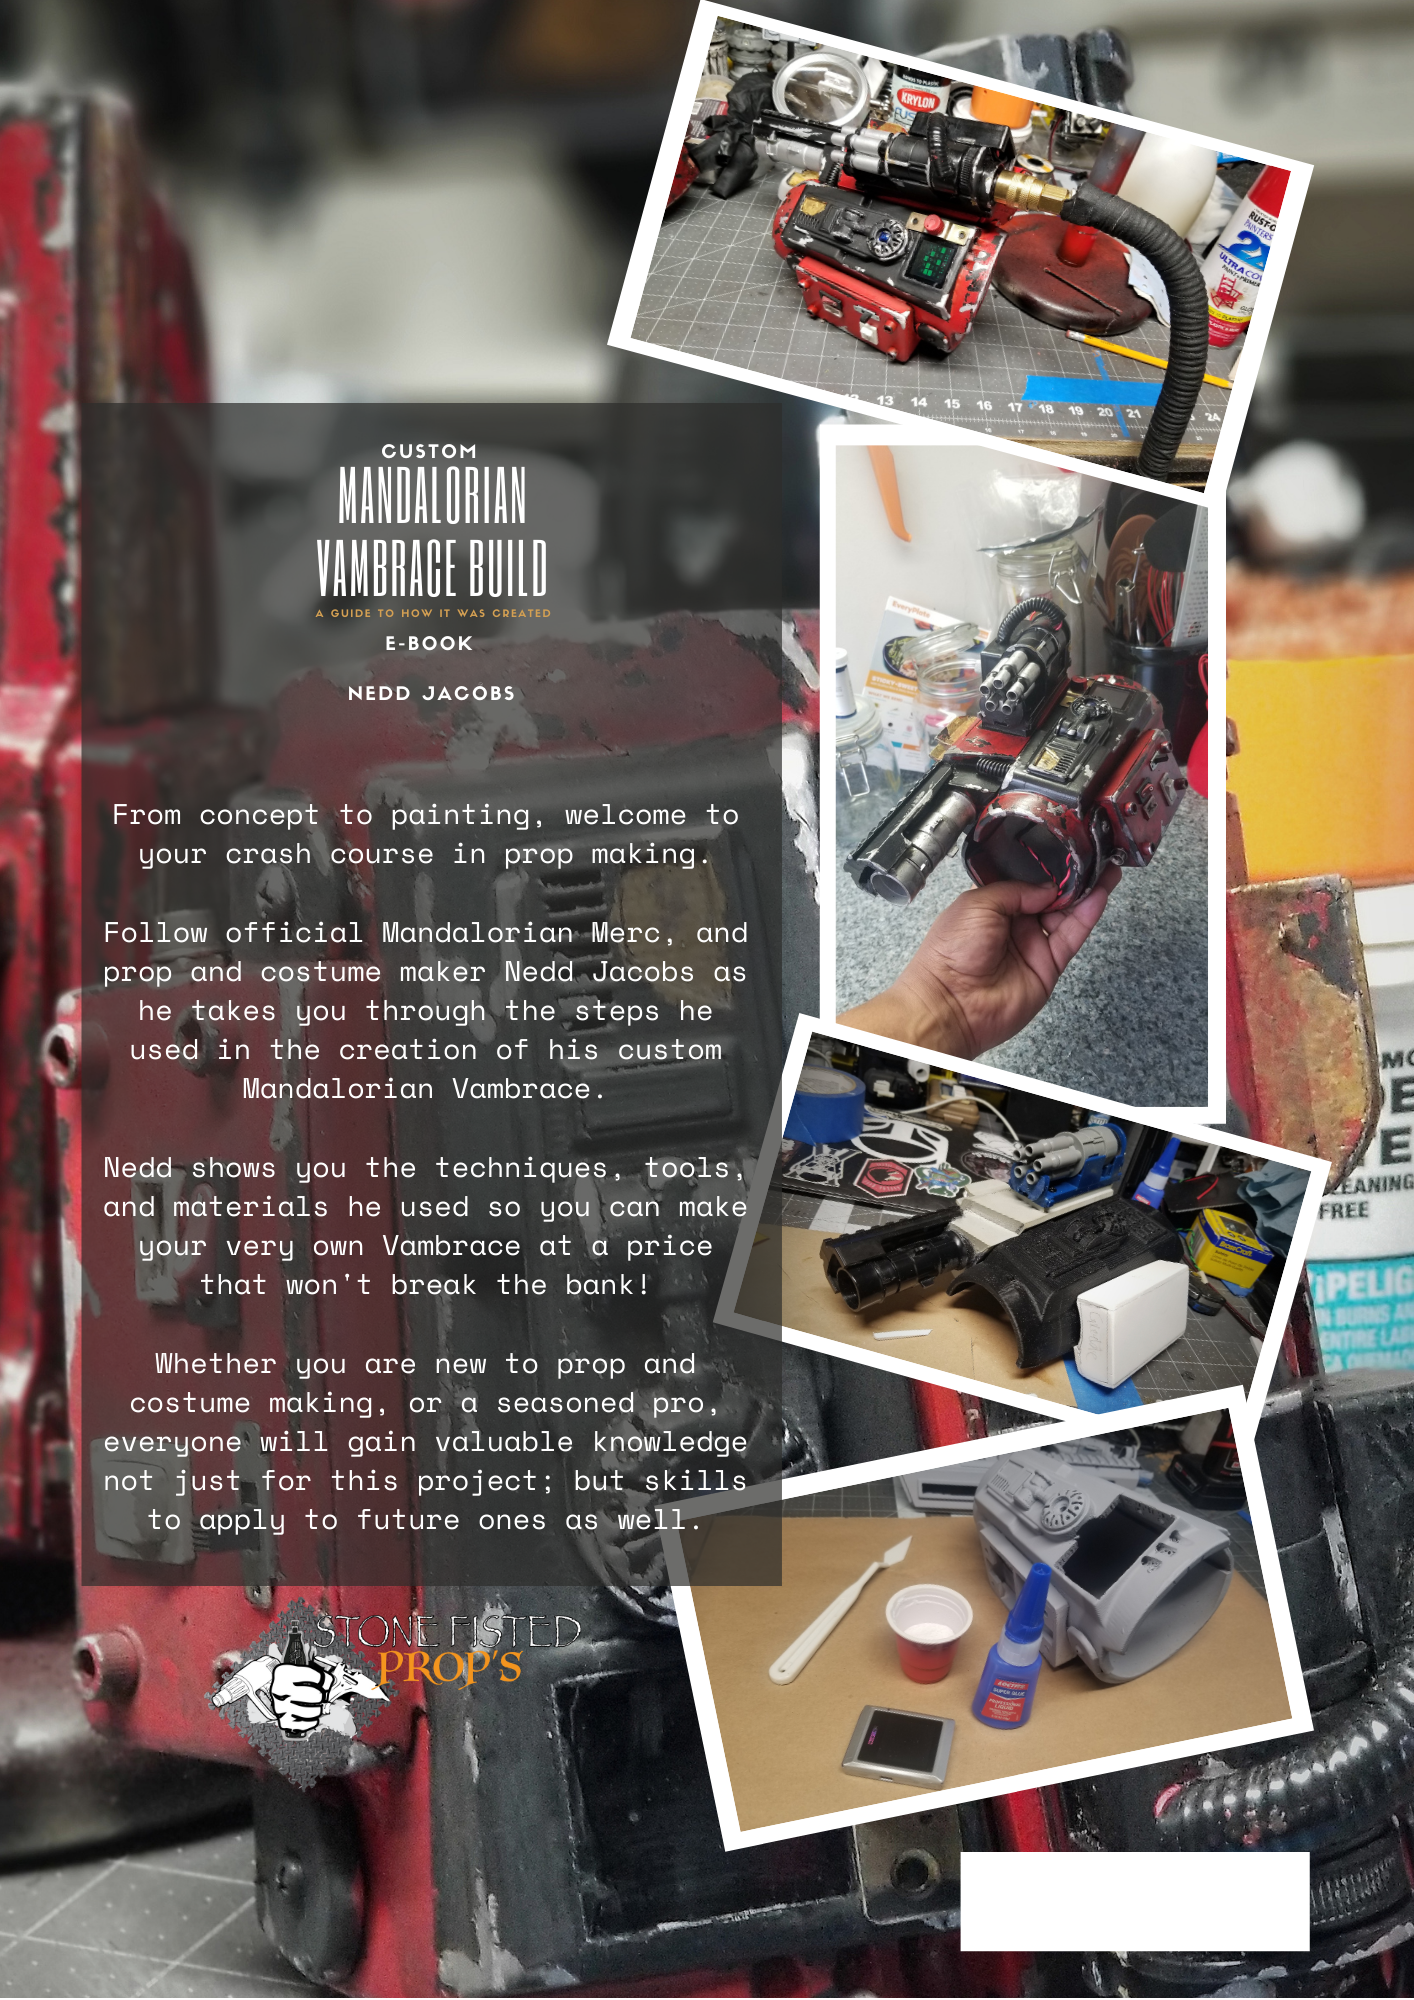 E-Book* Custom Mandalorian Vambrace Build: A guide to how it was created: by Nedd Jacobs